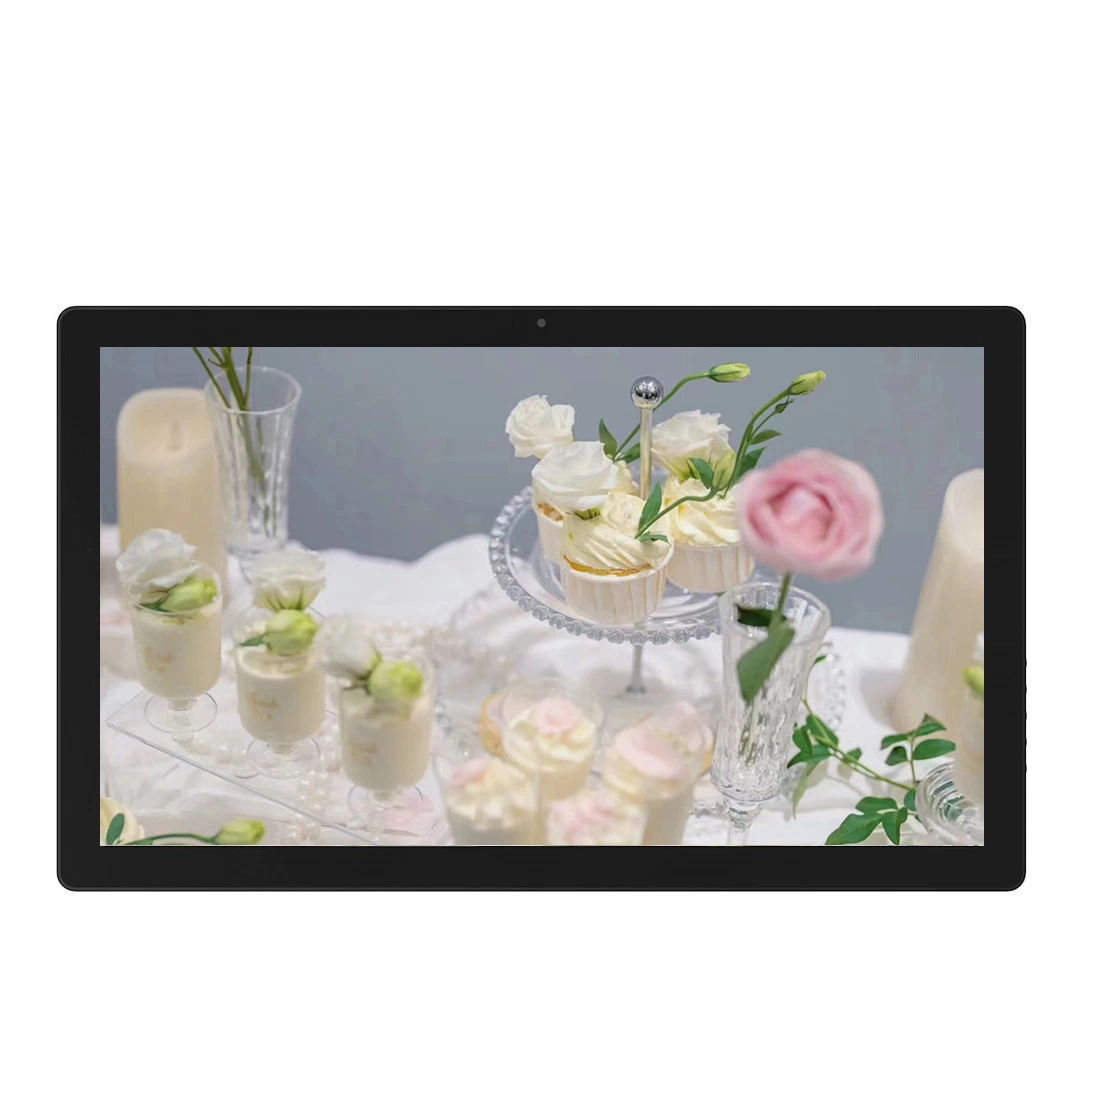 32 Inch LCD FHD Video Player WiFi Digital Photo Smart Picture Frame